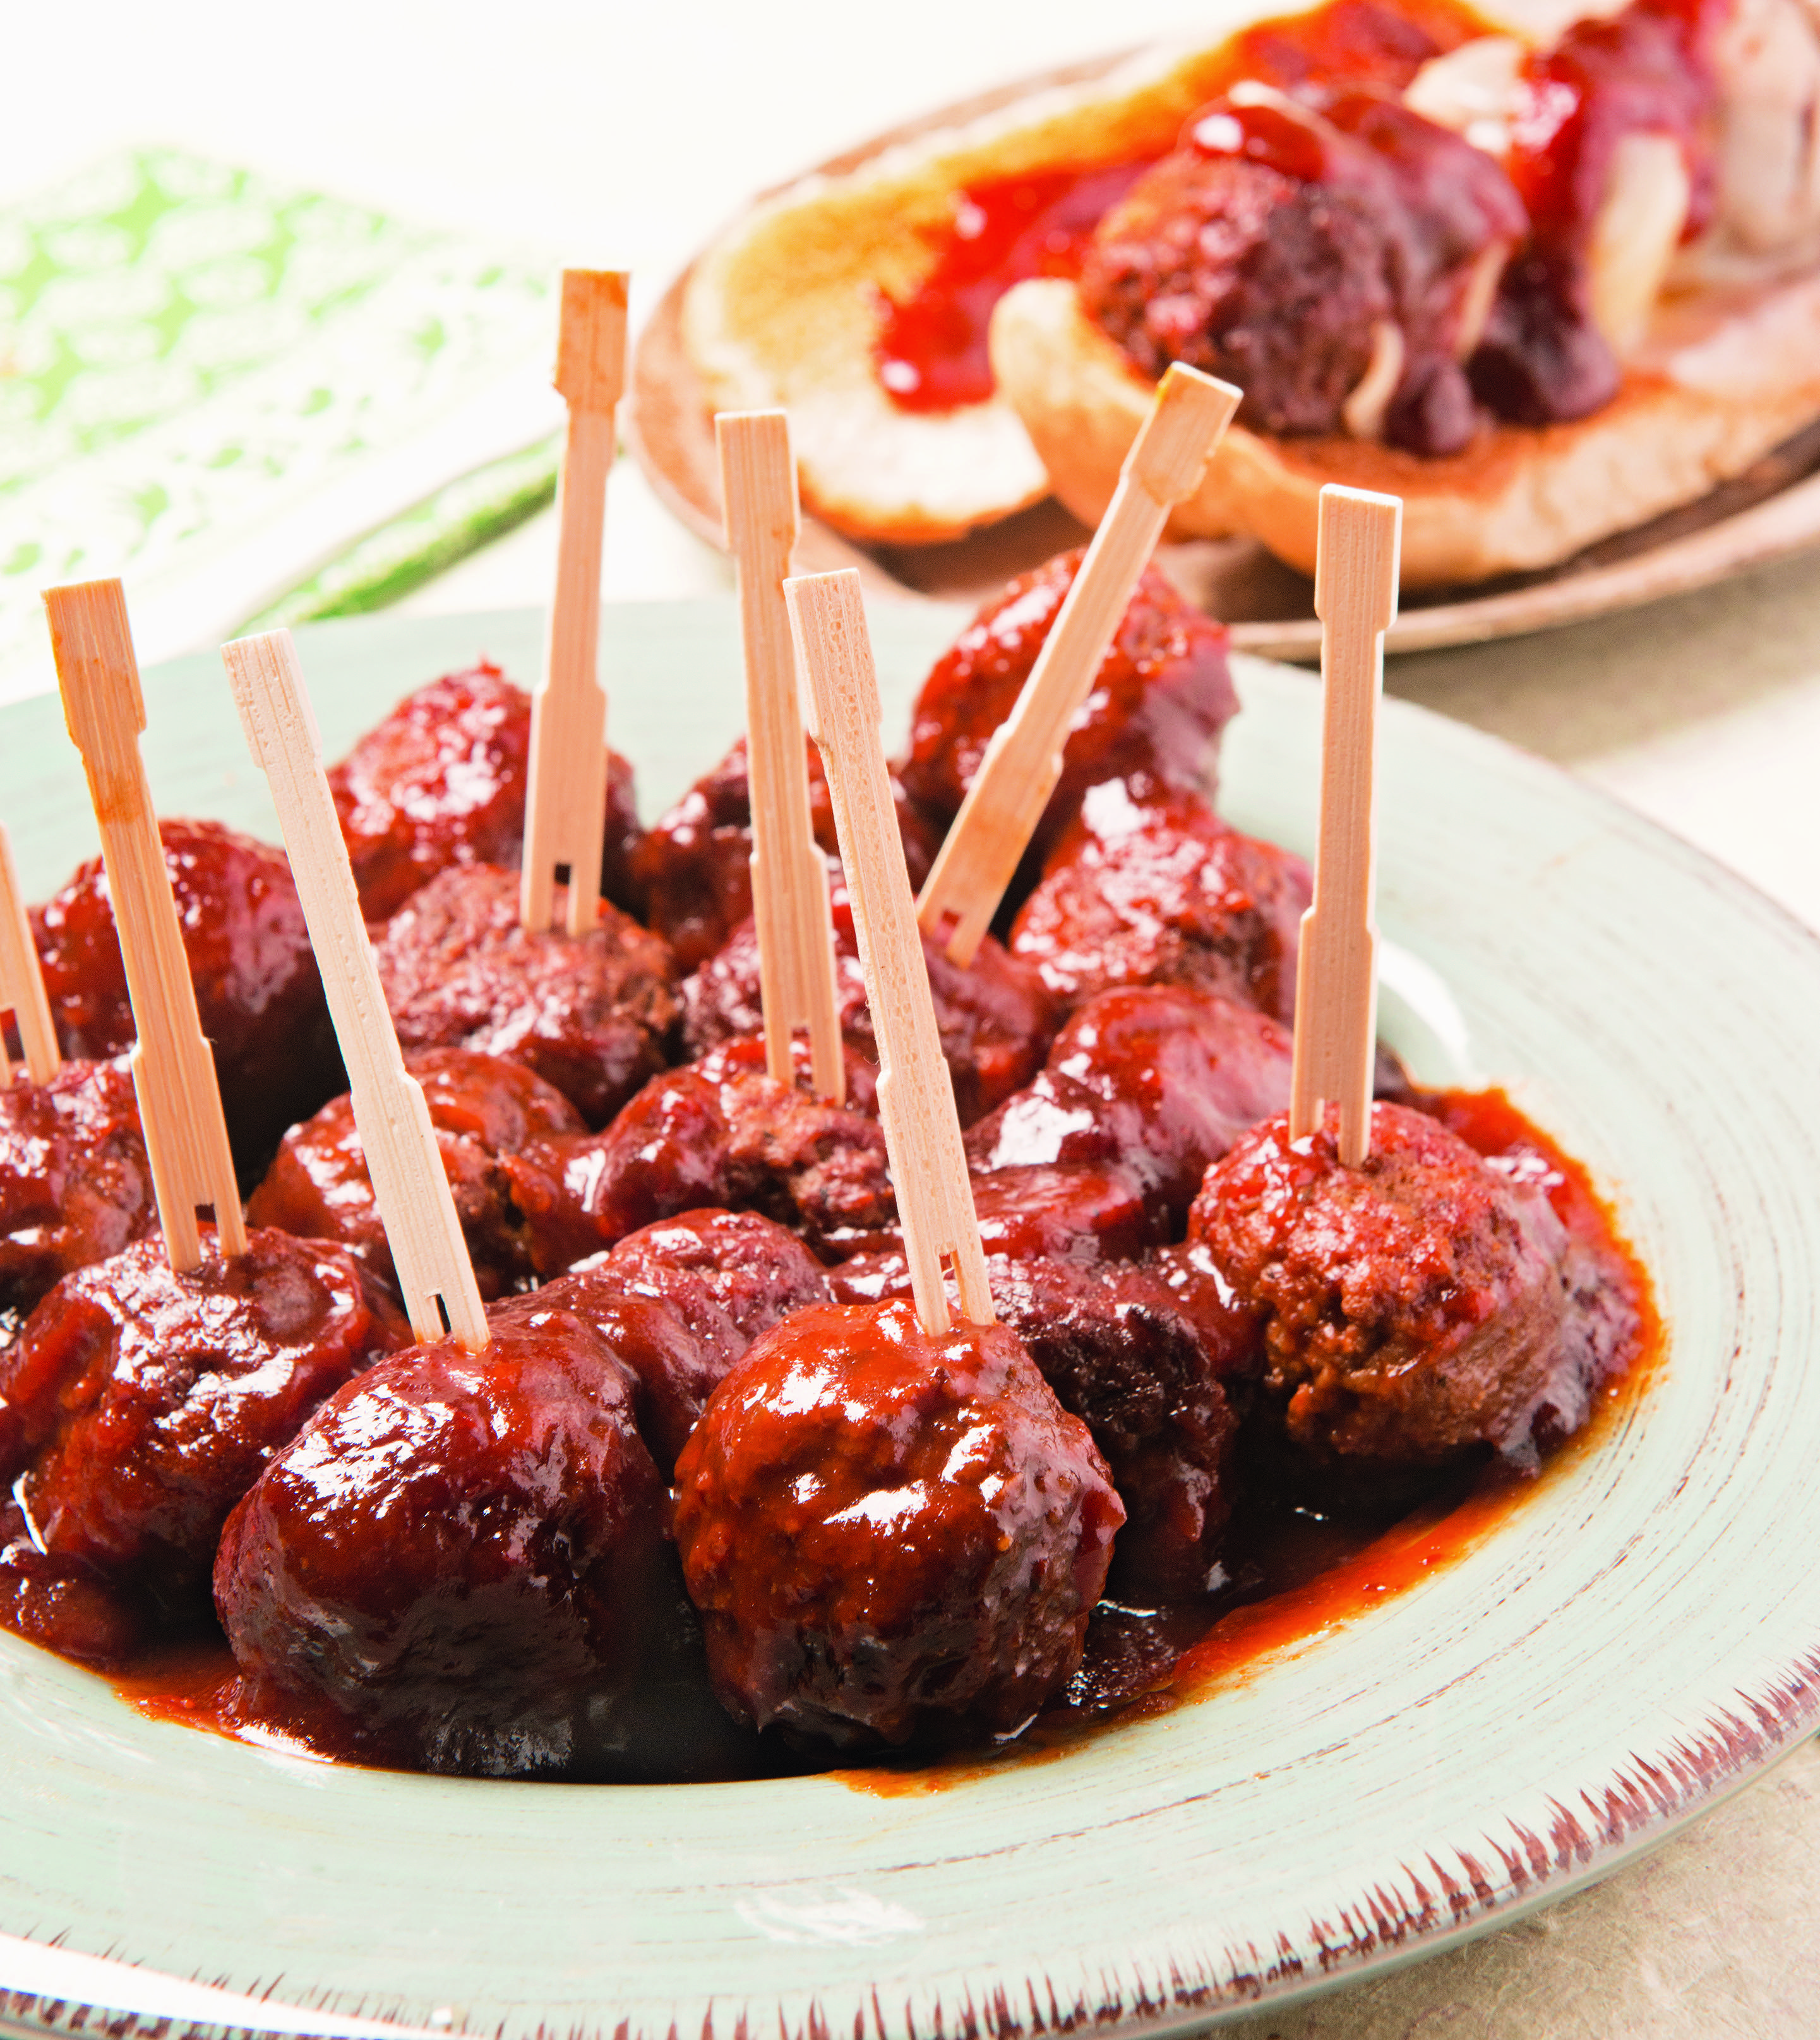 Slow Cooker Sweet Party Meatballs | Perfect for any party or get together, these party meatballs come together with everyday ingredients and cook in your slow cooker for an easy appetizer! | The Chunky Chef | #appetizer #partyfood #meatballrecipe #cocktailmeatballs #partymeatballrecipe